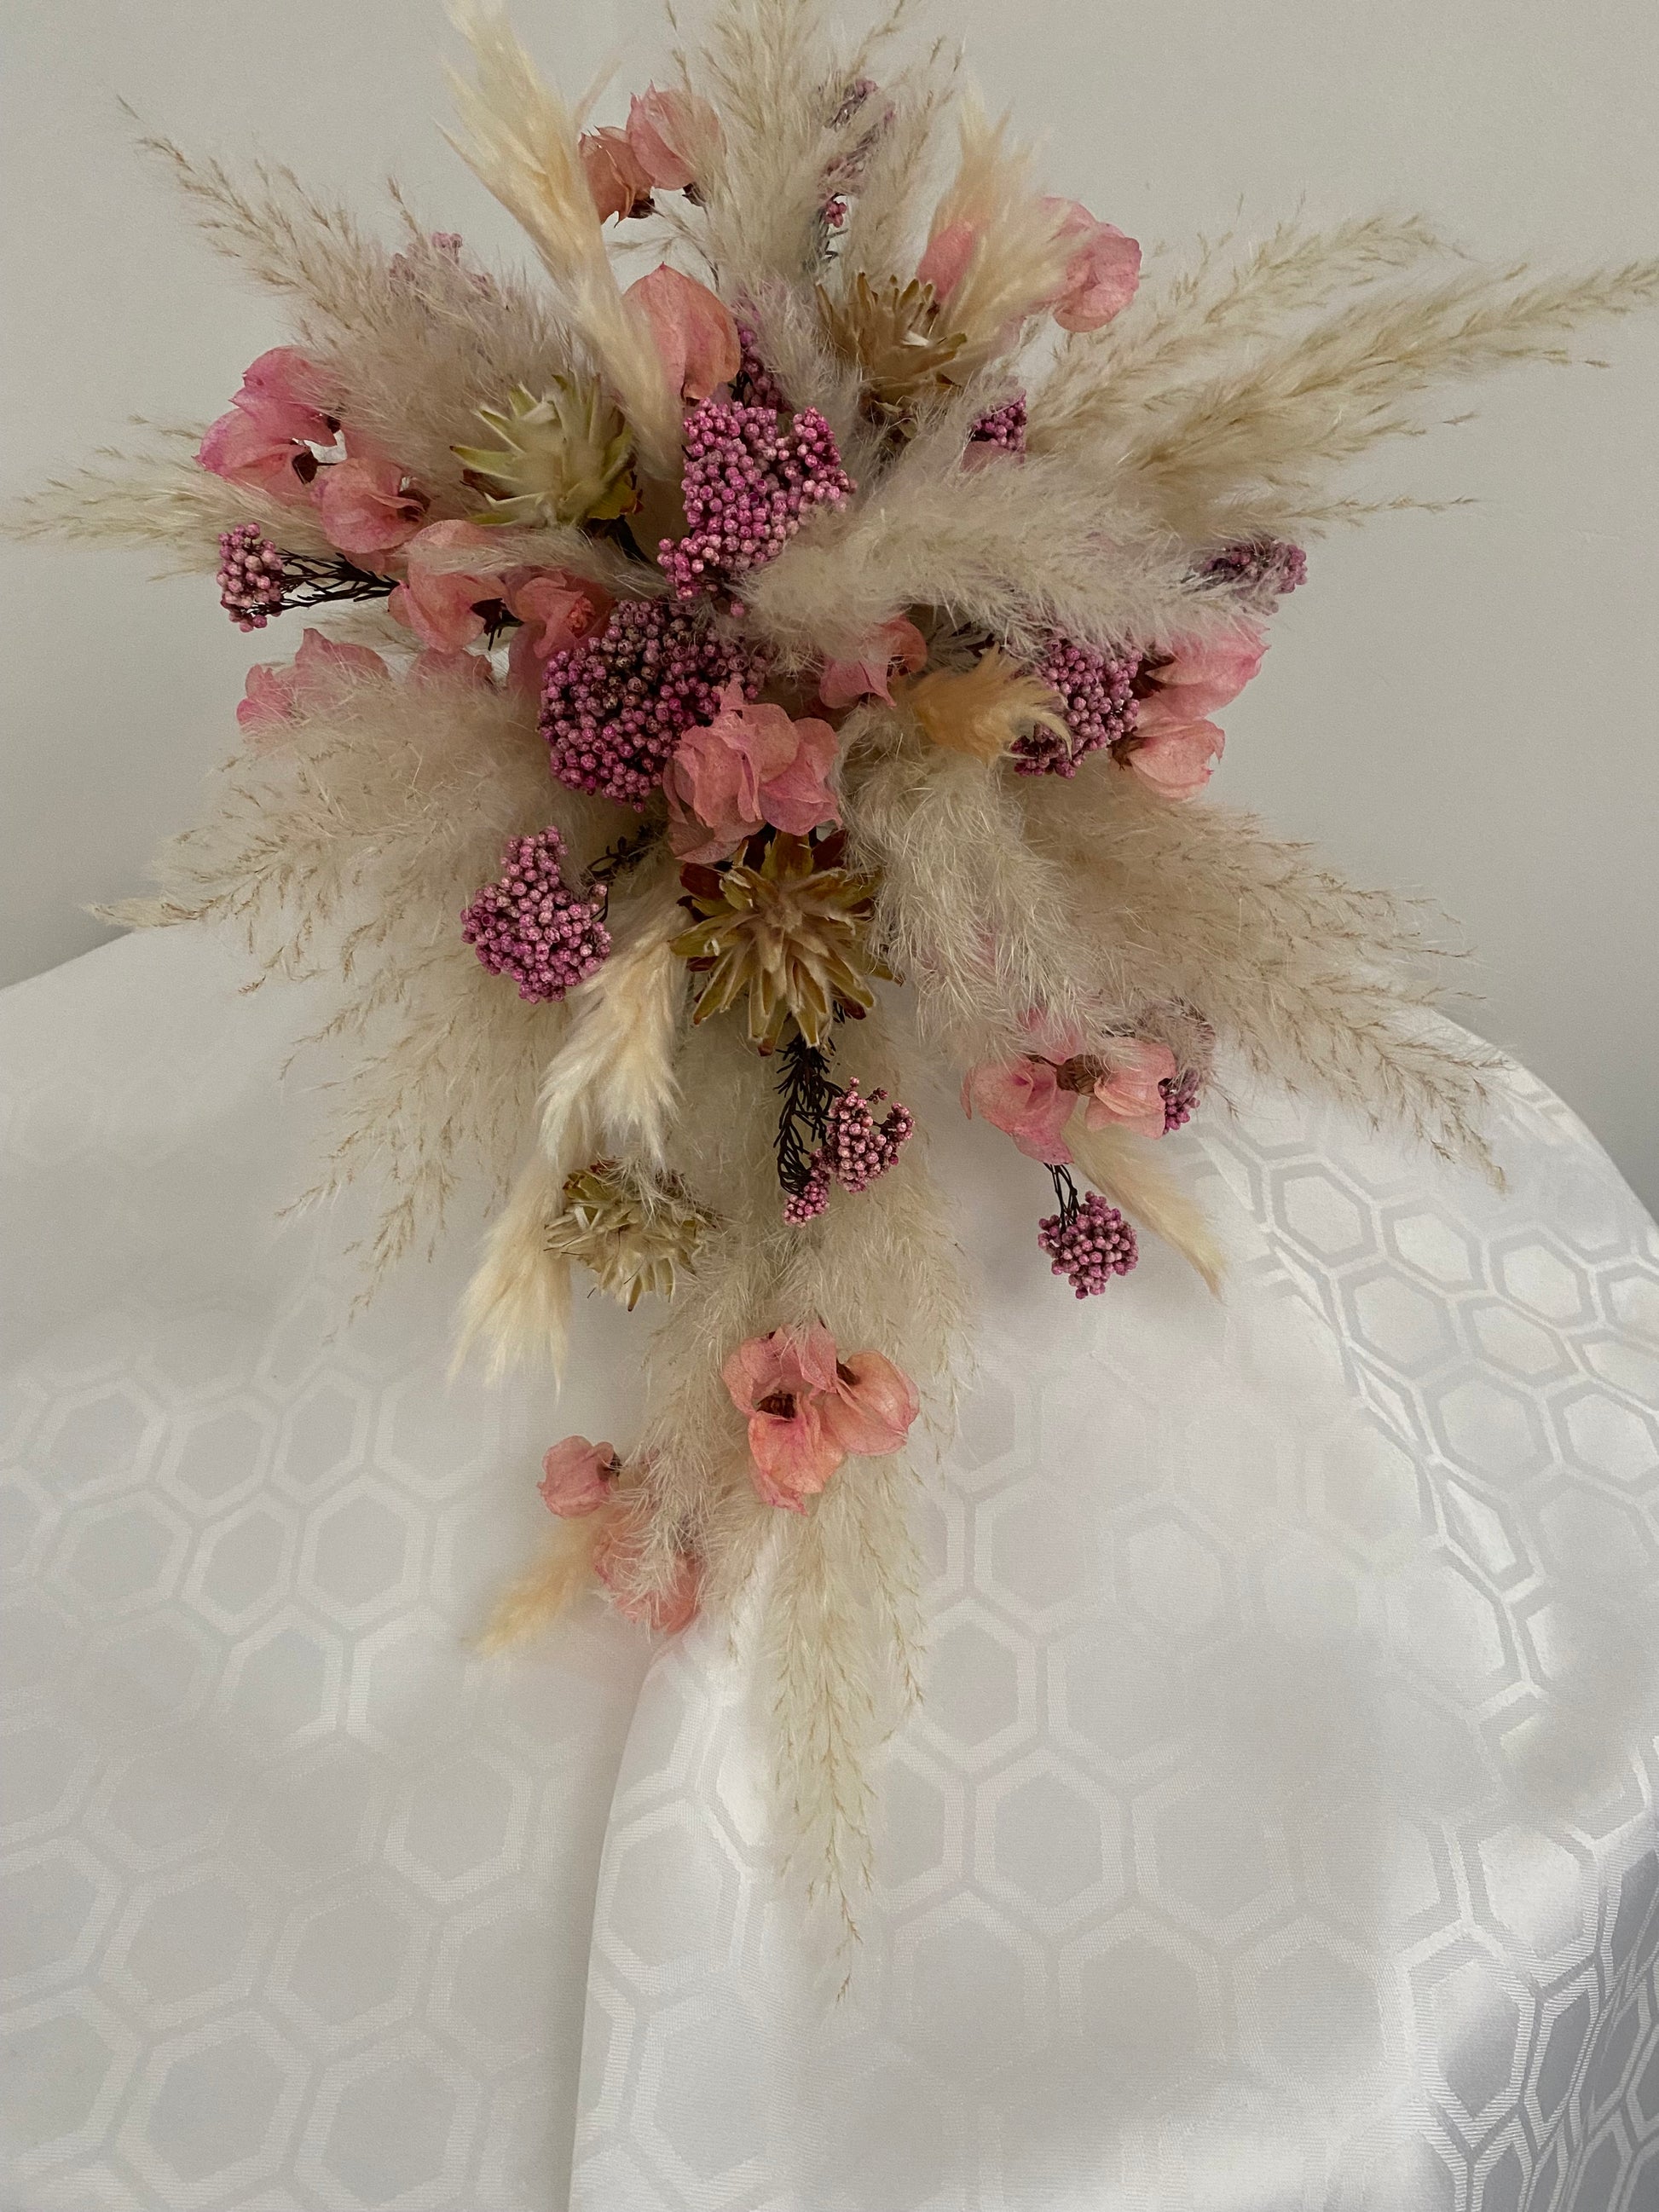 Dried Flowers Brides wedding bouquet. Natural and long lasting. Natural shades of pink and cream